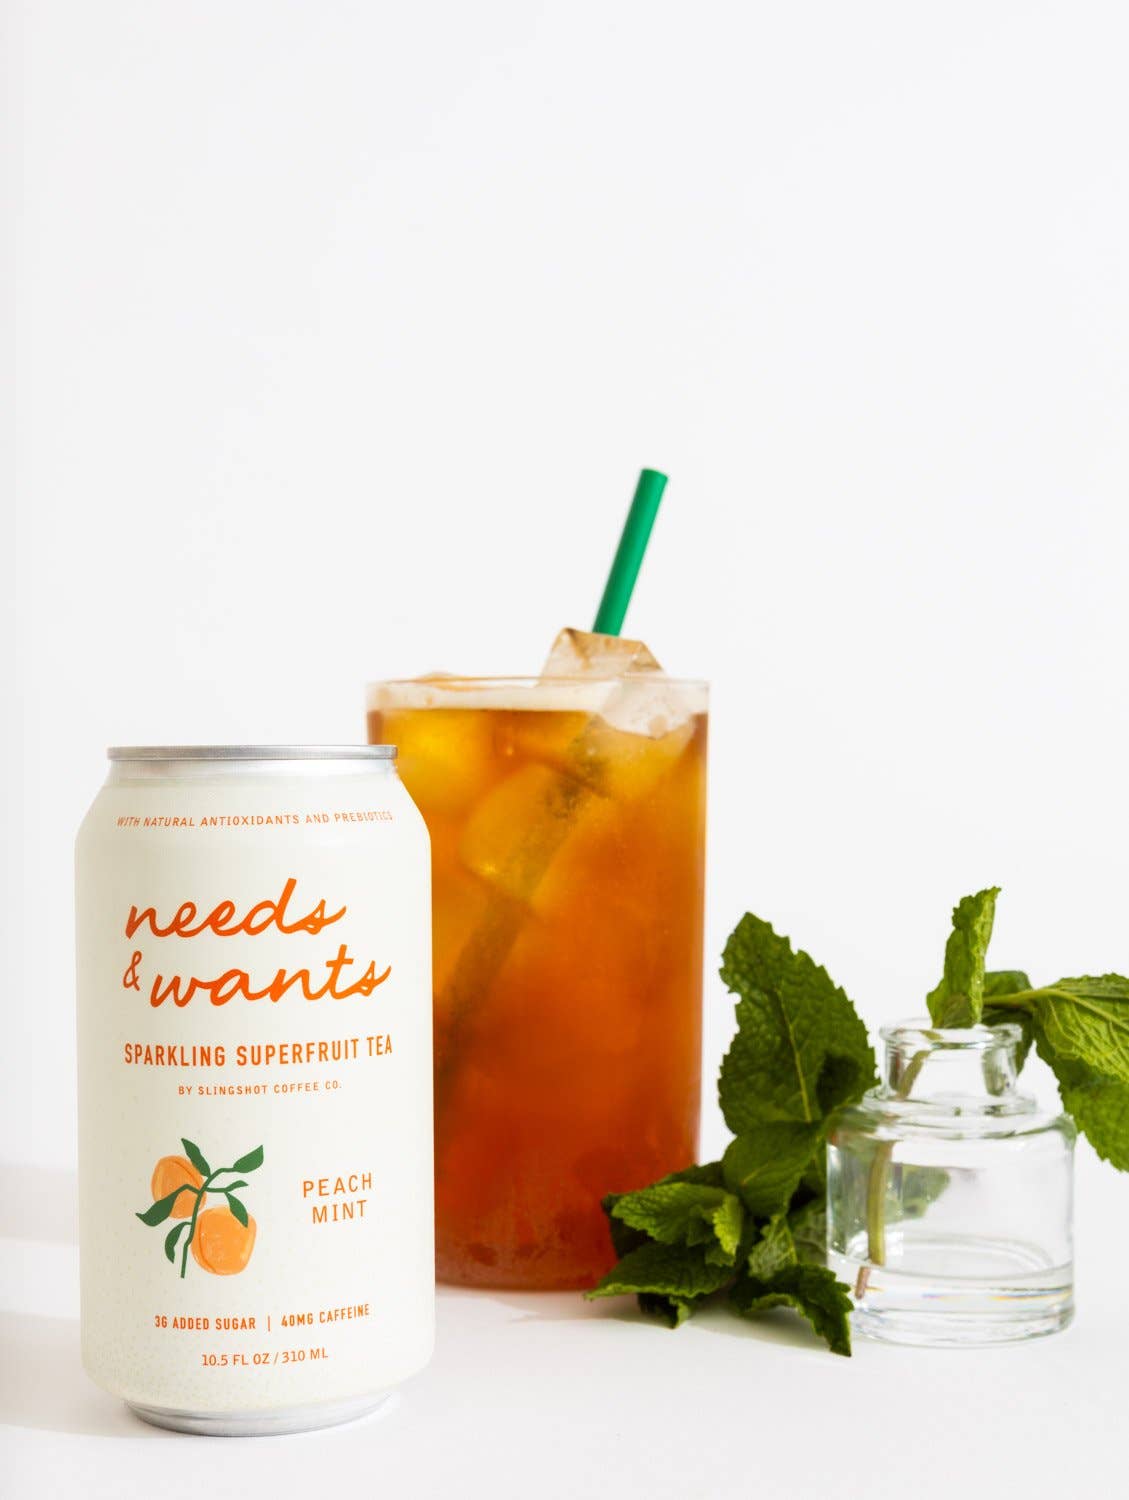 Needs & Wants Sparkling Superfruit Tea - Peach Mint  Slingshot Coffee Company   -better made easy-eco-friendly-sustainable-gifting